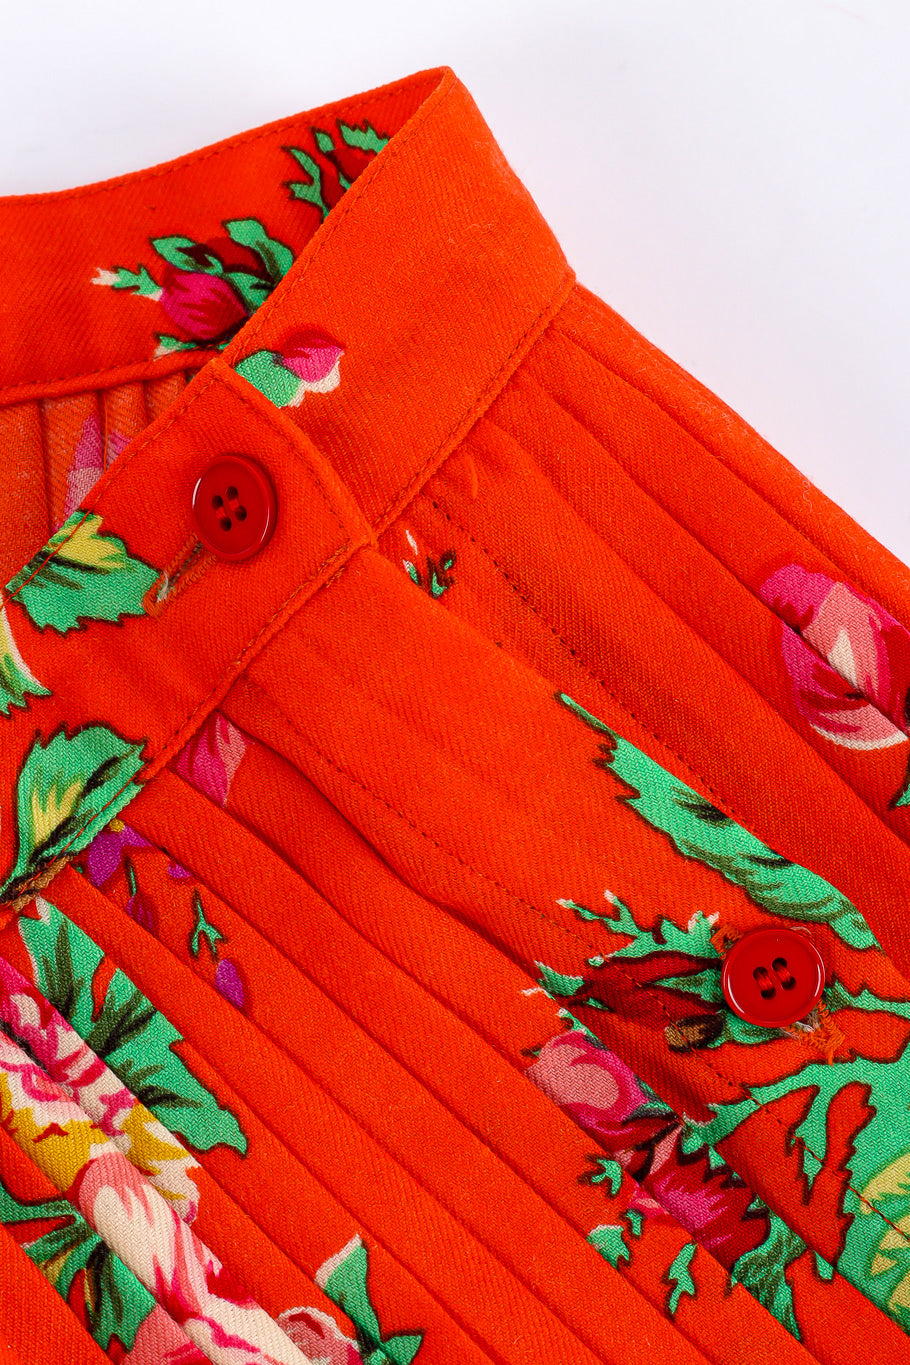 Bright floral pleated skirt by Kenzo Paris button waistband close @recessla